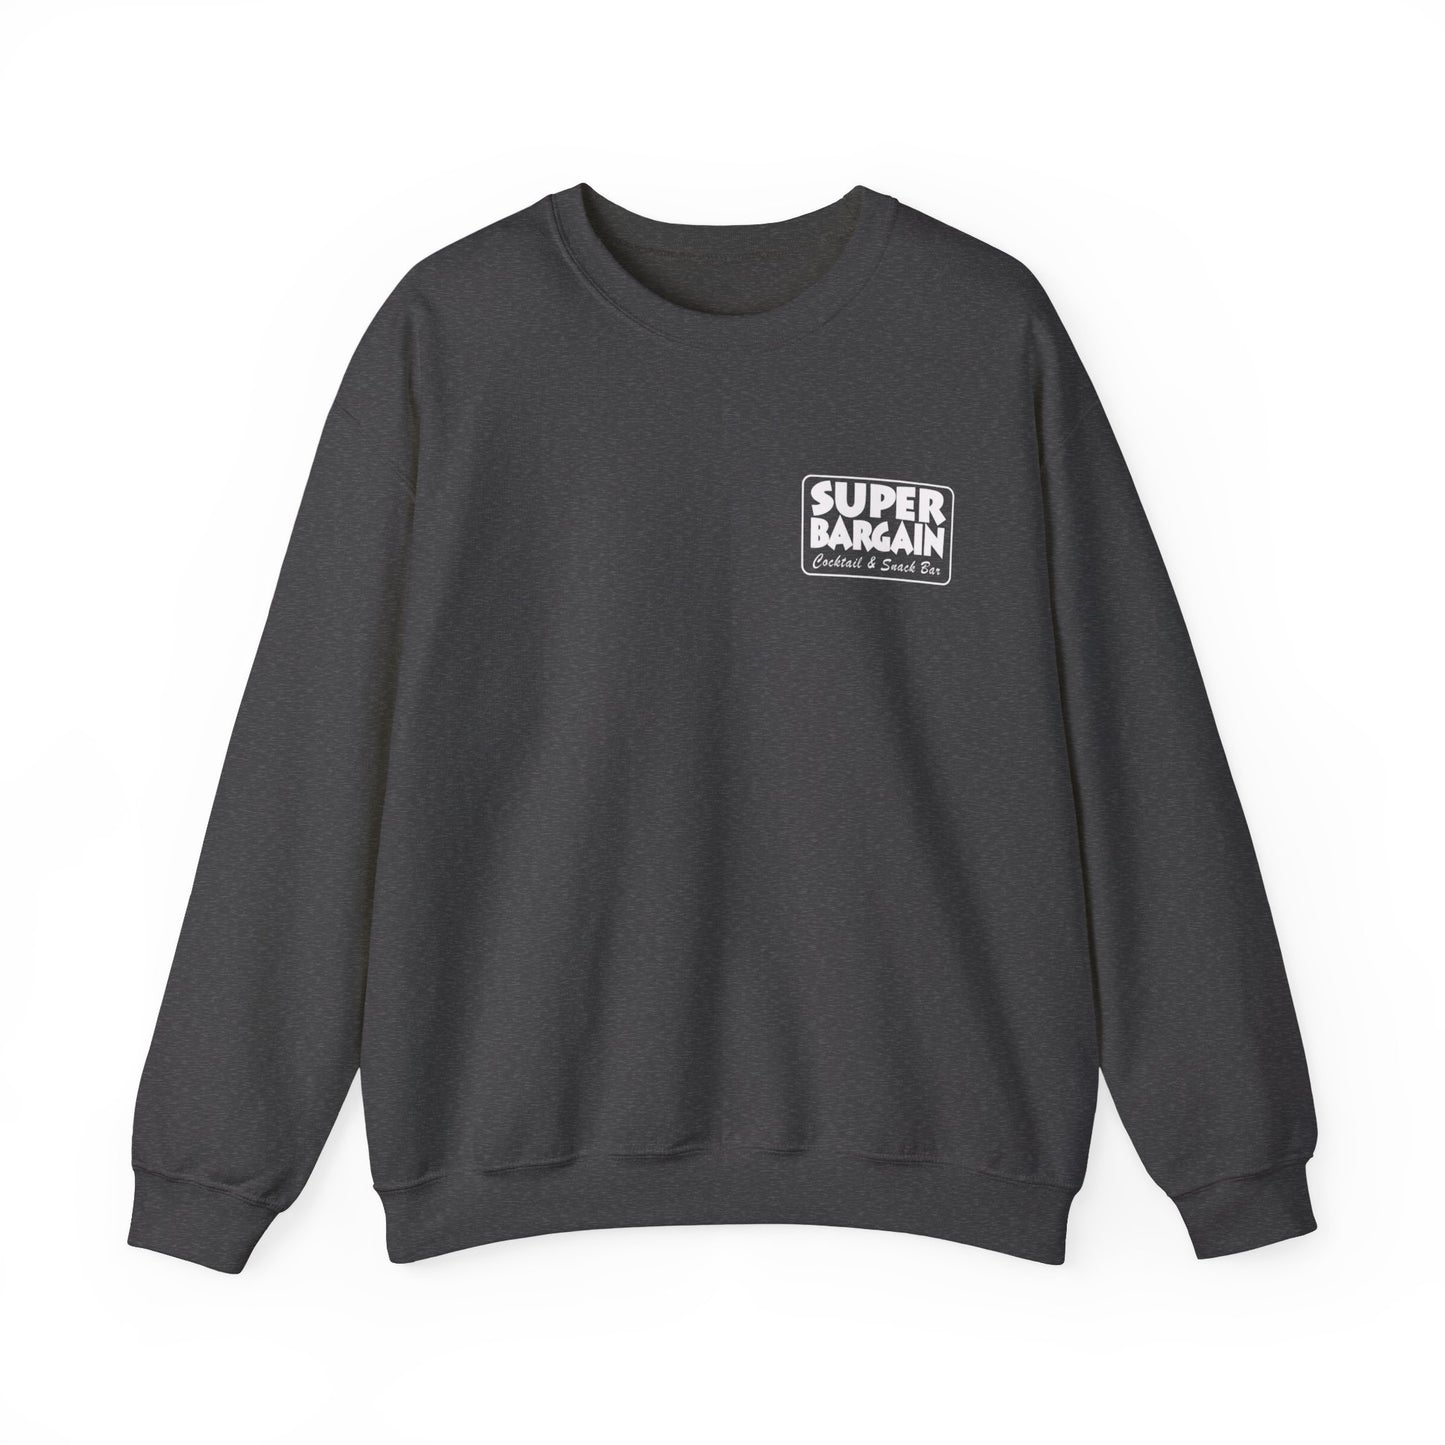 A plain dark gray Printify Unisex Heavy Blend™ Crewneck Monochrome Logo Sweatshirt with the phrase "SUPER BARGAIN" printed in white block letters inside a black square on the upper left chest area. The sweatshirt is displayed on a white background, and features the word "Toronto" in small letters just below the main print.